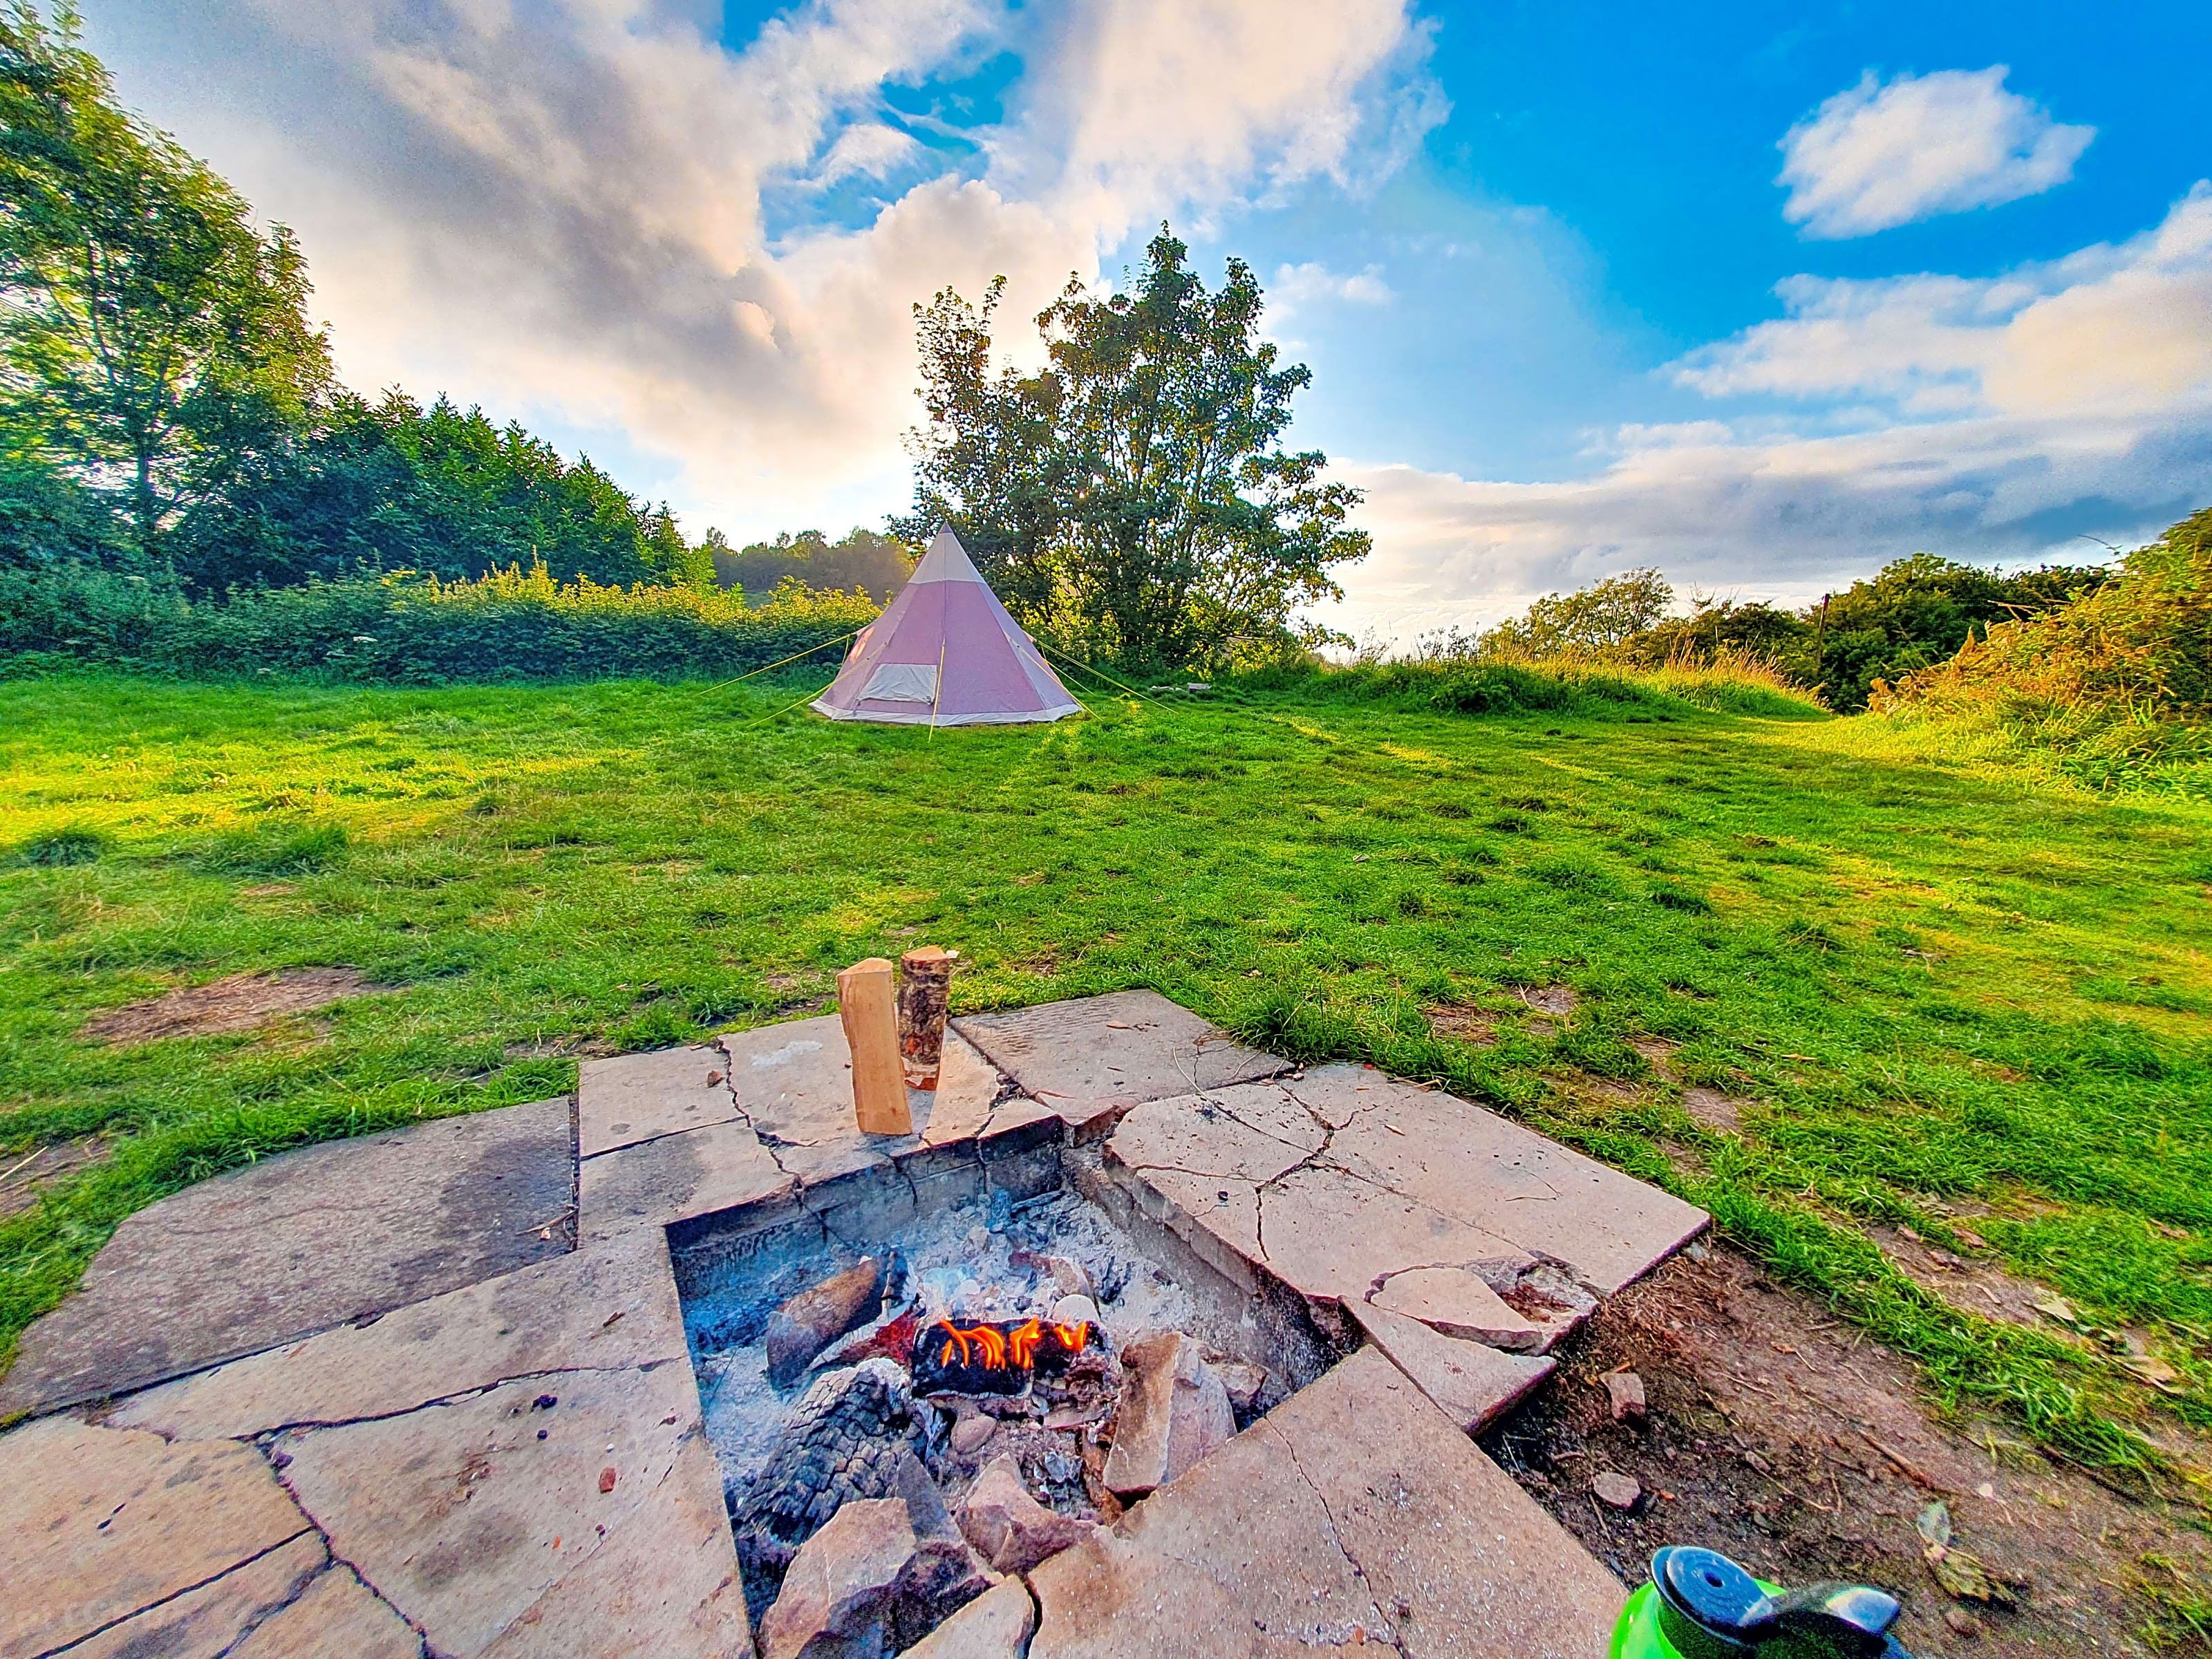 The Batch Campsite, Cheddar, Somerset